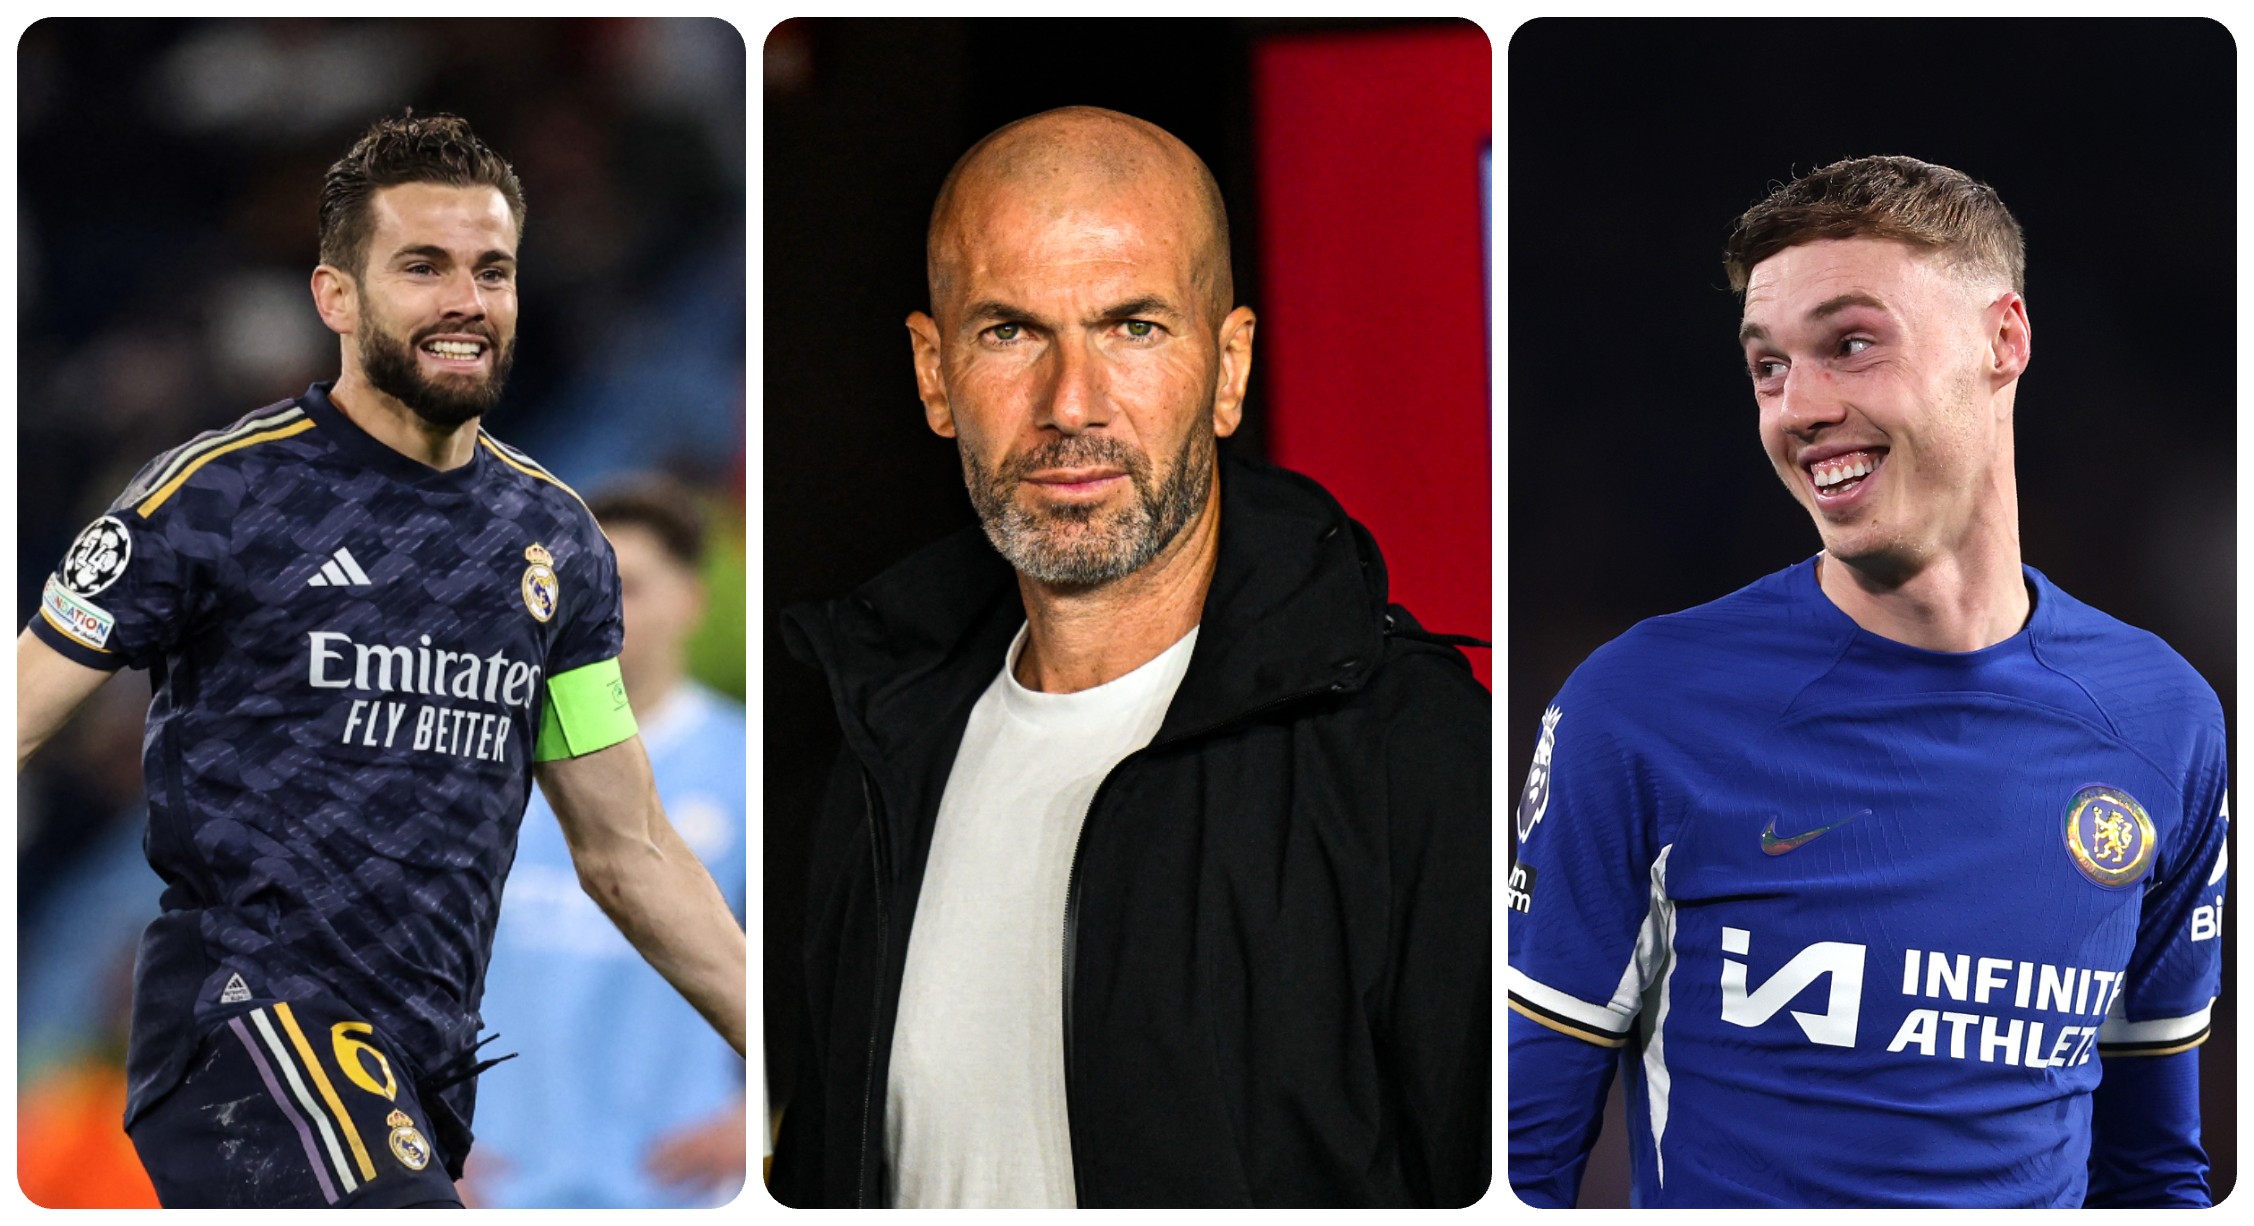 EXCL: Bayern discuss Zidane, Palmer the danger for City and more